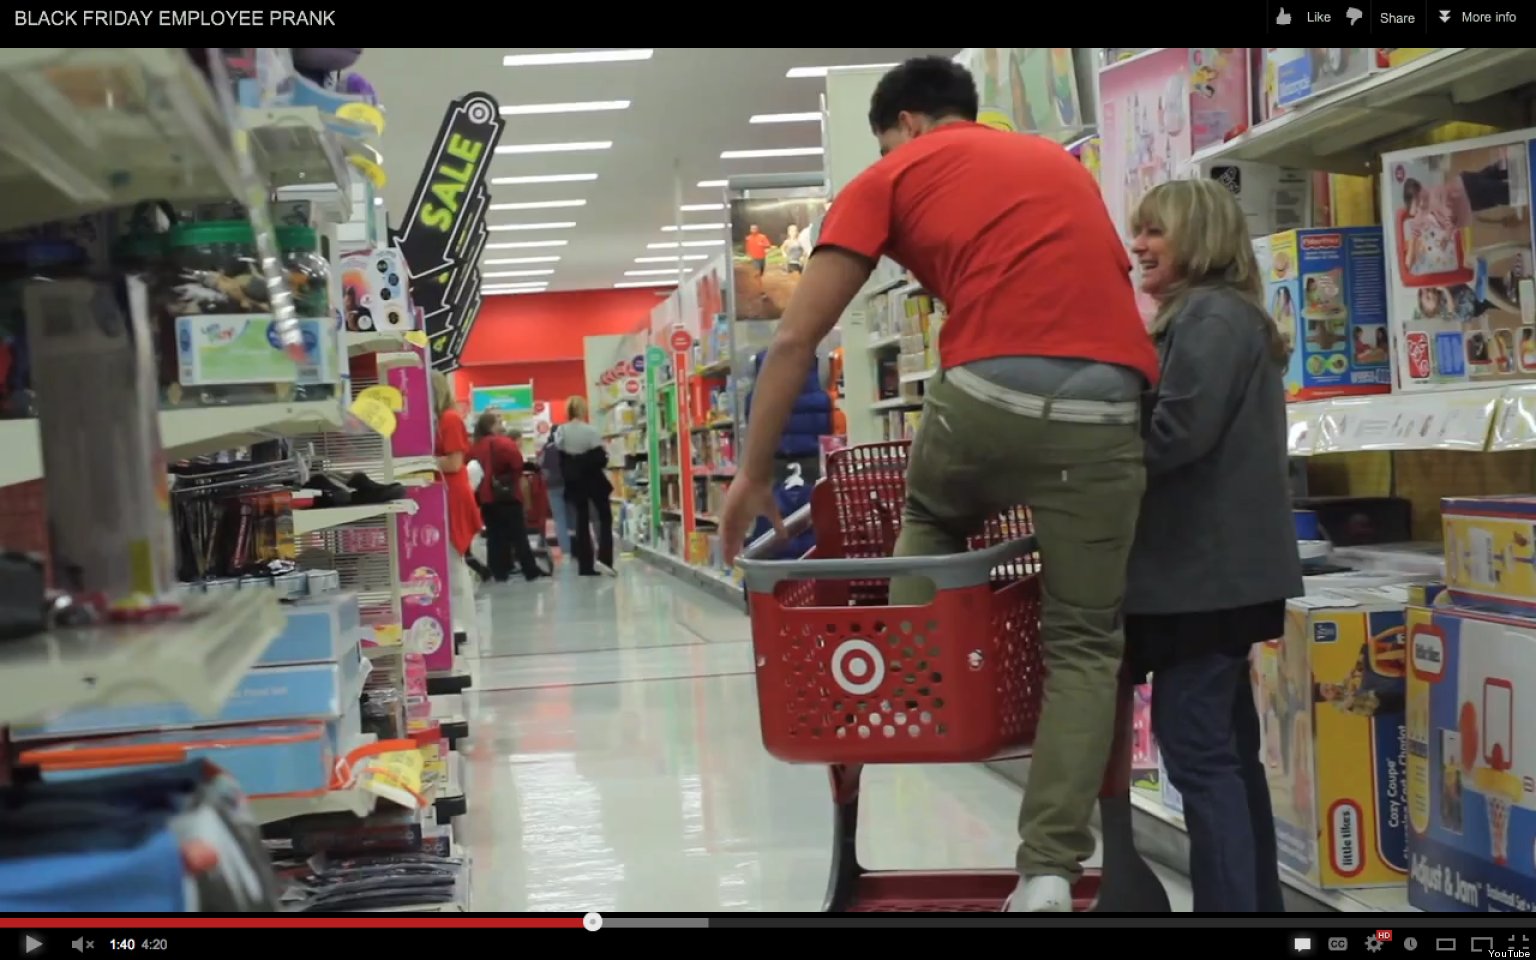 Black Friday Prank: Fake Target Employees Confuse Shoppers (VIDEO)